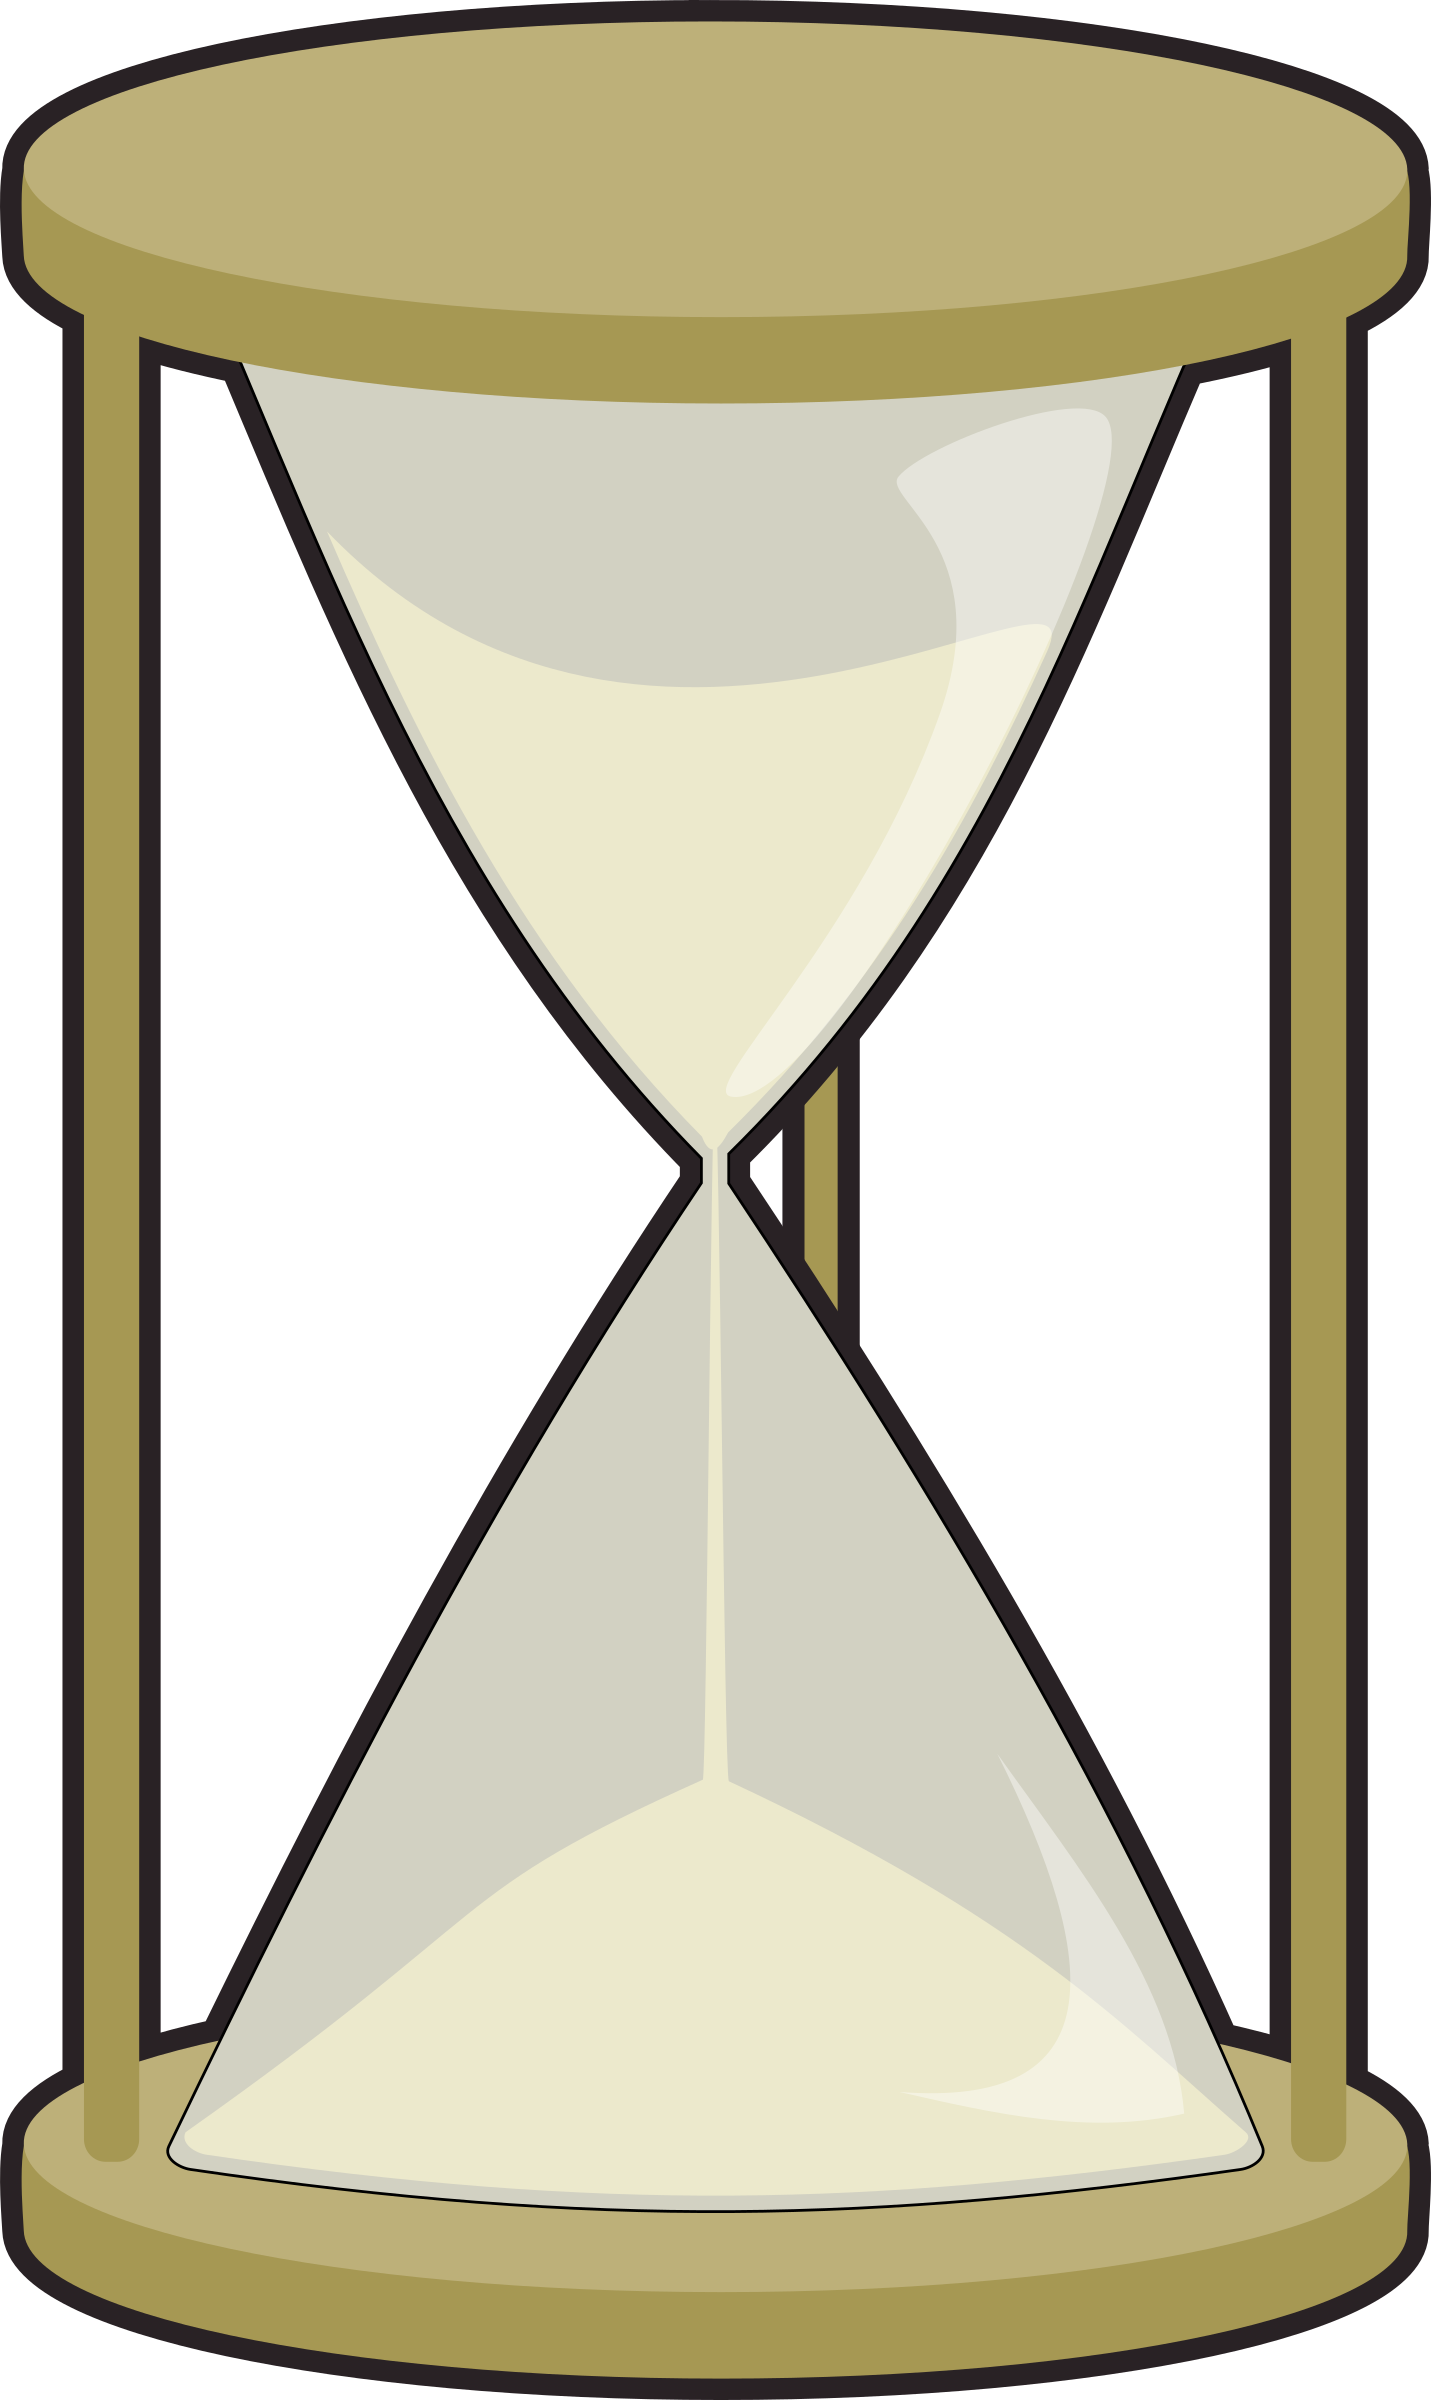 Hourglass Computer Icons Animation Clip Art - Hourglass Computer Icons Animation Clip Art (1431x2400)